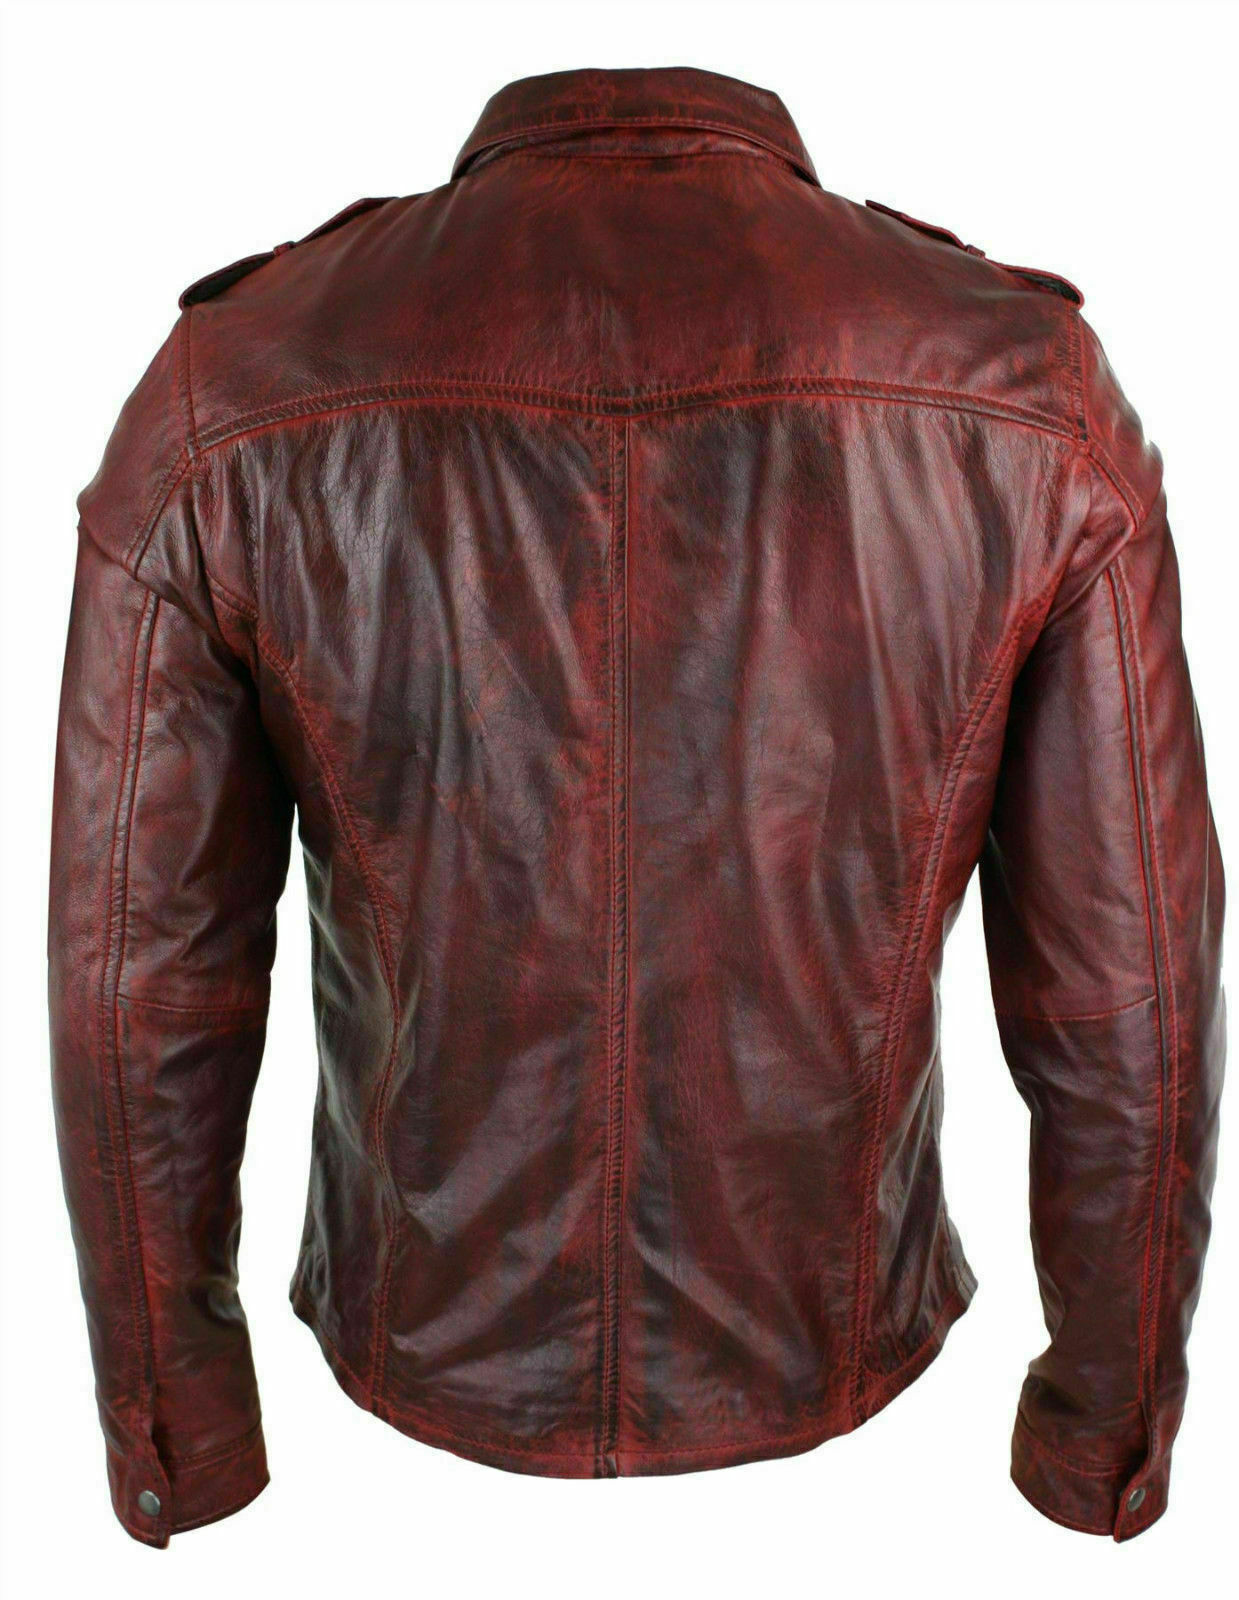 New Men's Shirt Jacket Maroon Real Soft Genuine Waxed Leather Shirt Le ...